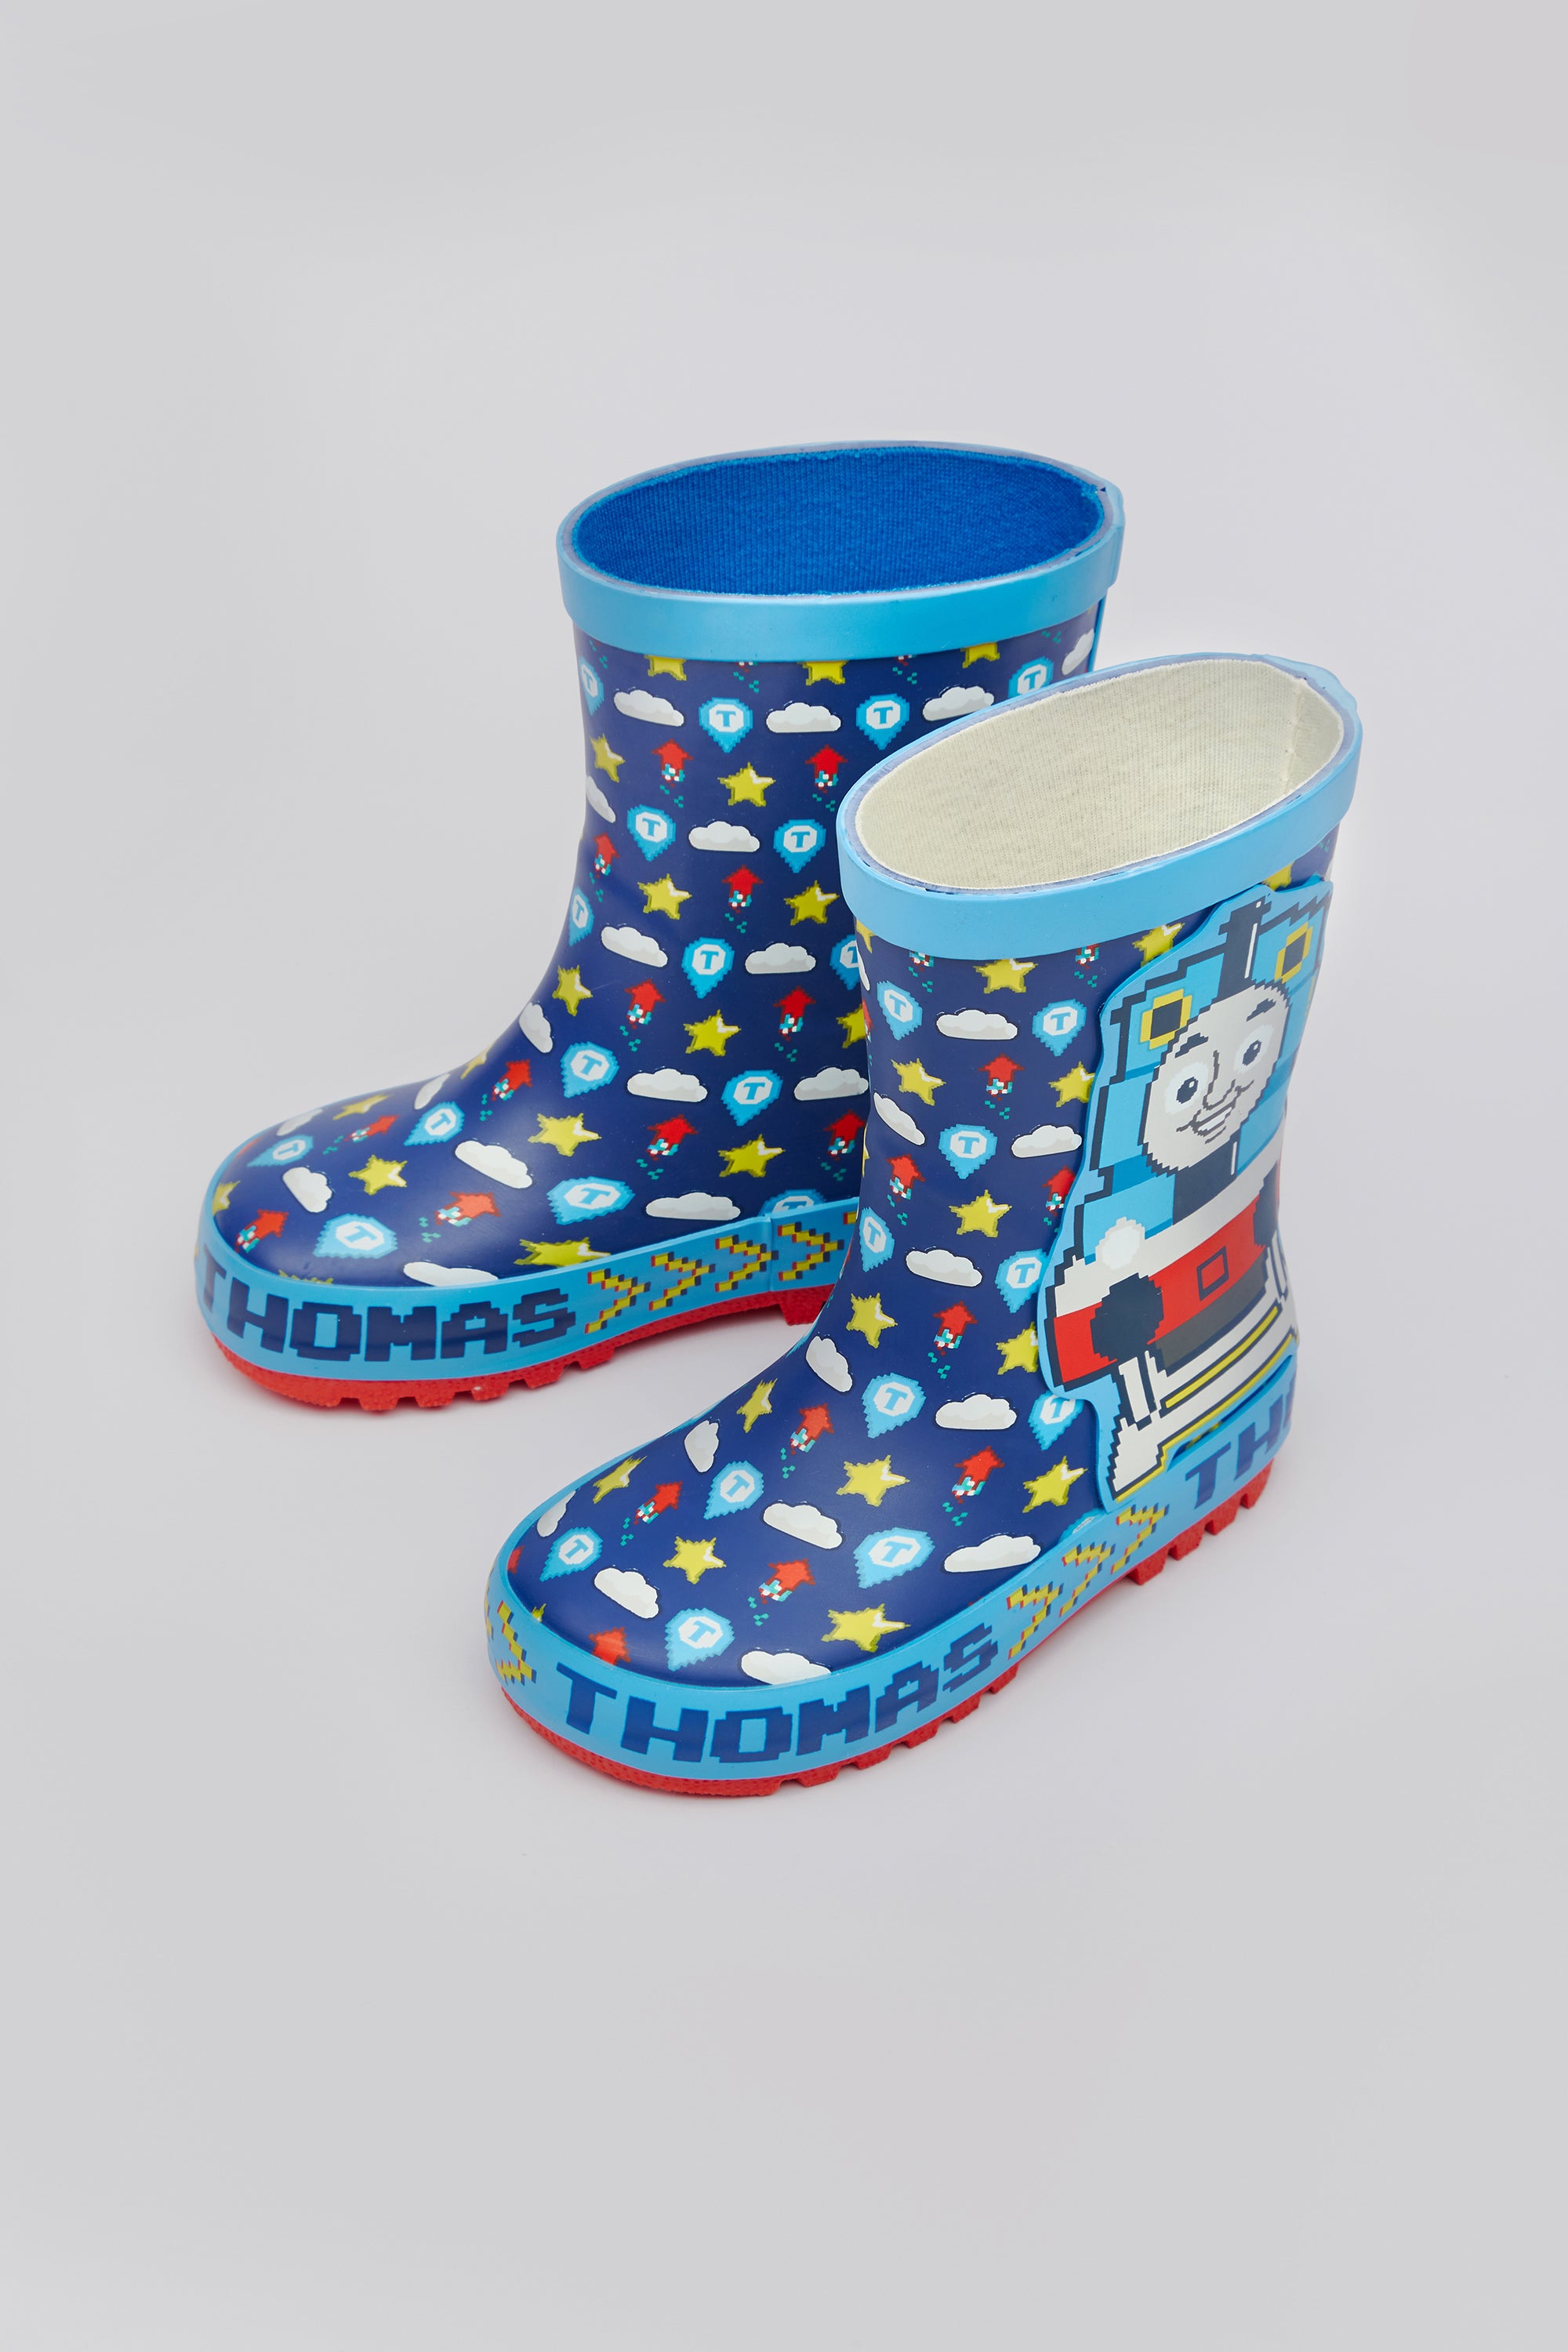 THOMAS THORNHILL WELLY